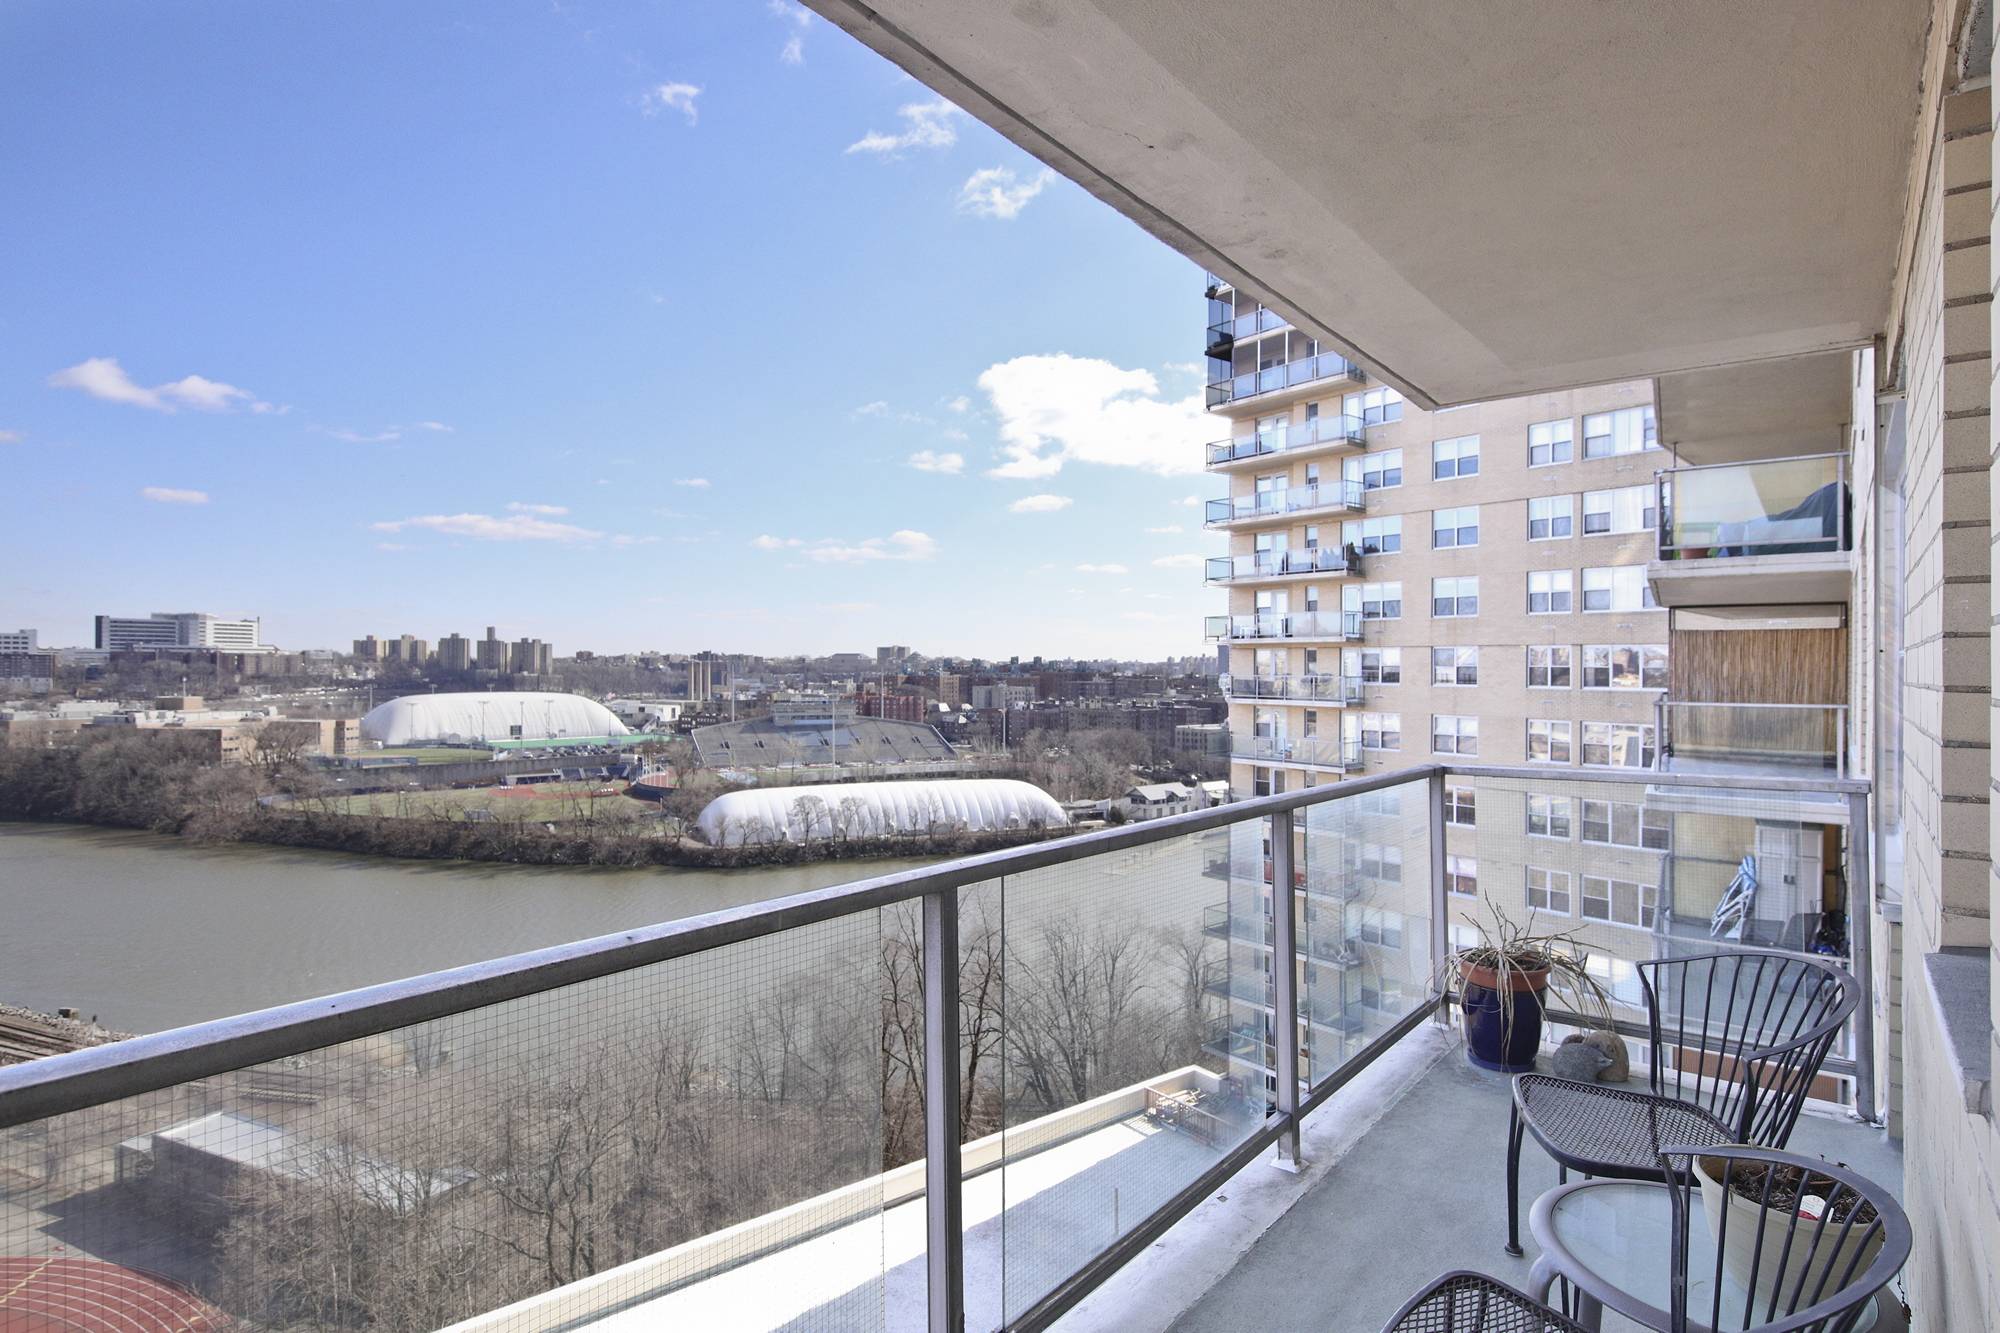 Welcome home to the Winston Churchill, a prestigious luxury coop in Spuyten Duyvil South Riverdale.